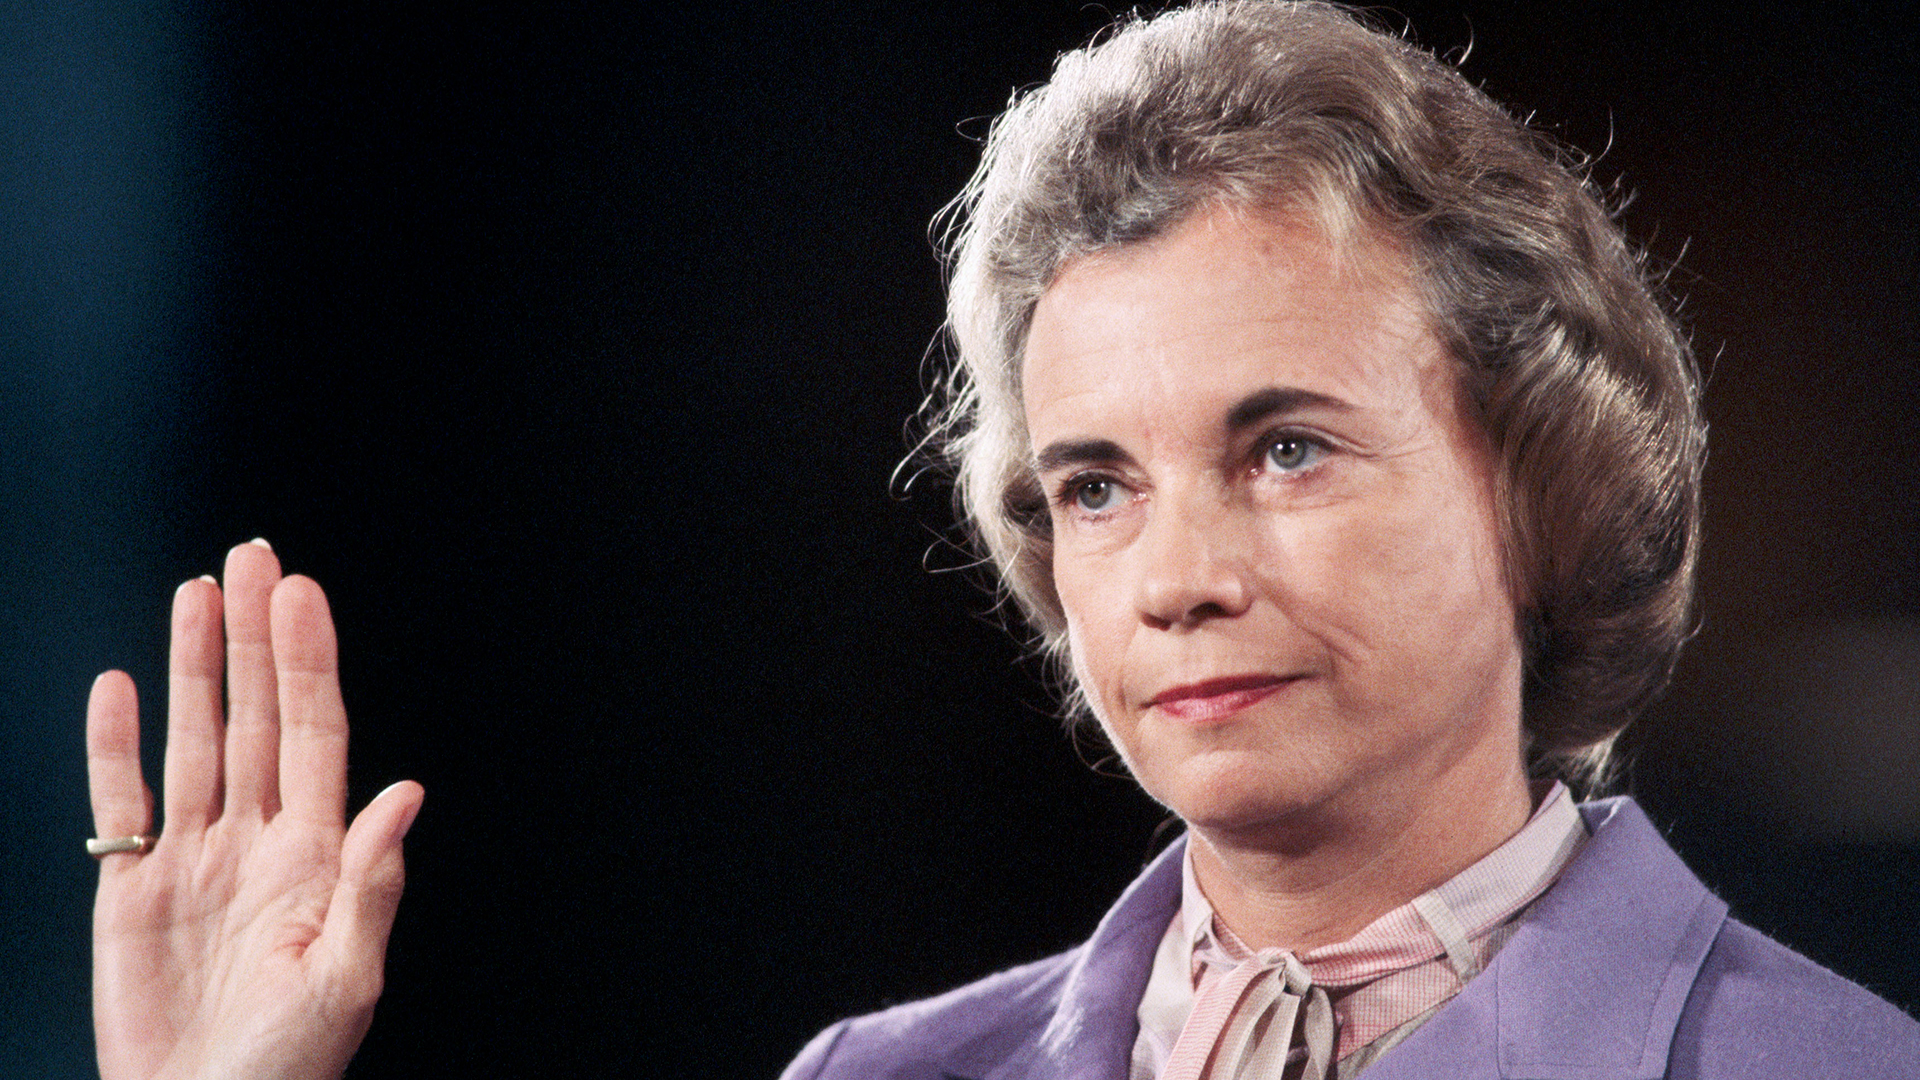 July 7, 1981: Sandra Day O’Connor Was Nominated as the First Female U.S. Supreme Court Justice